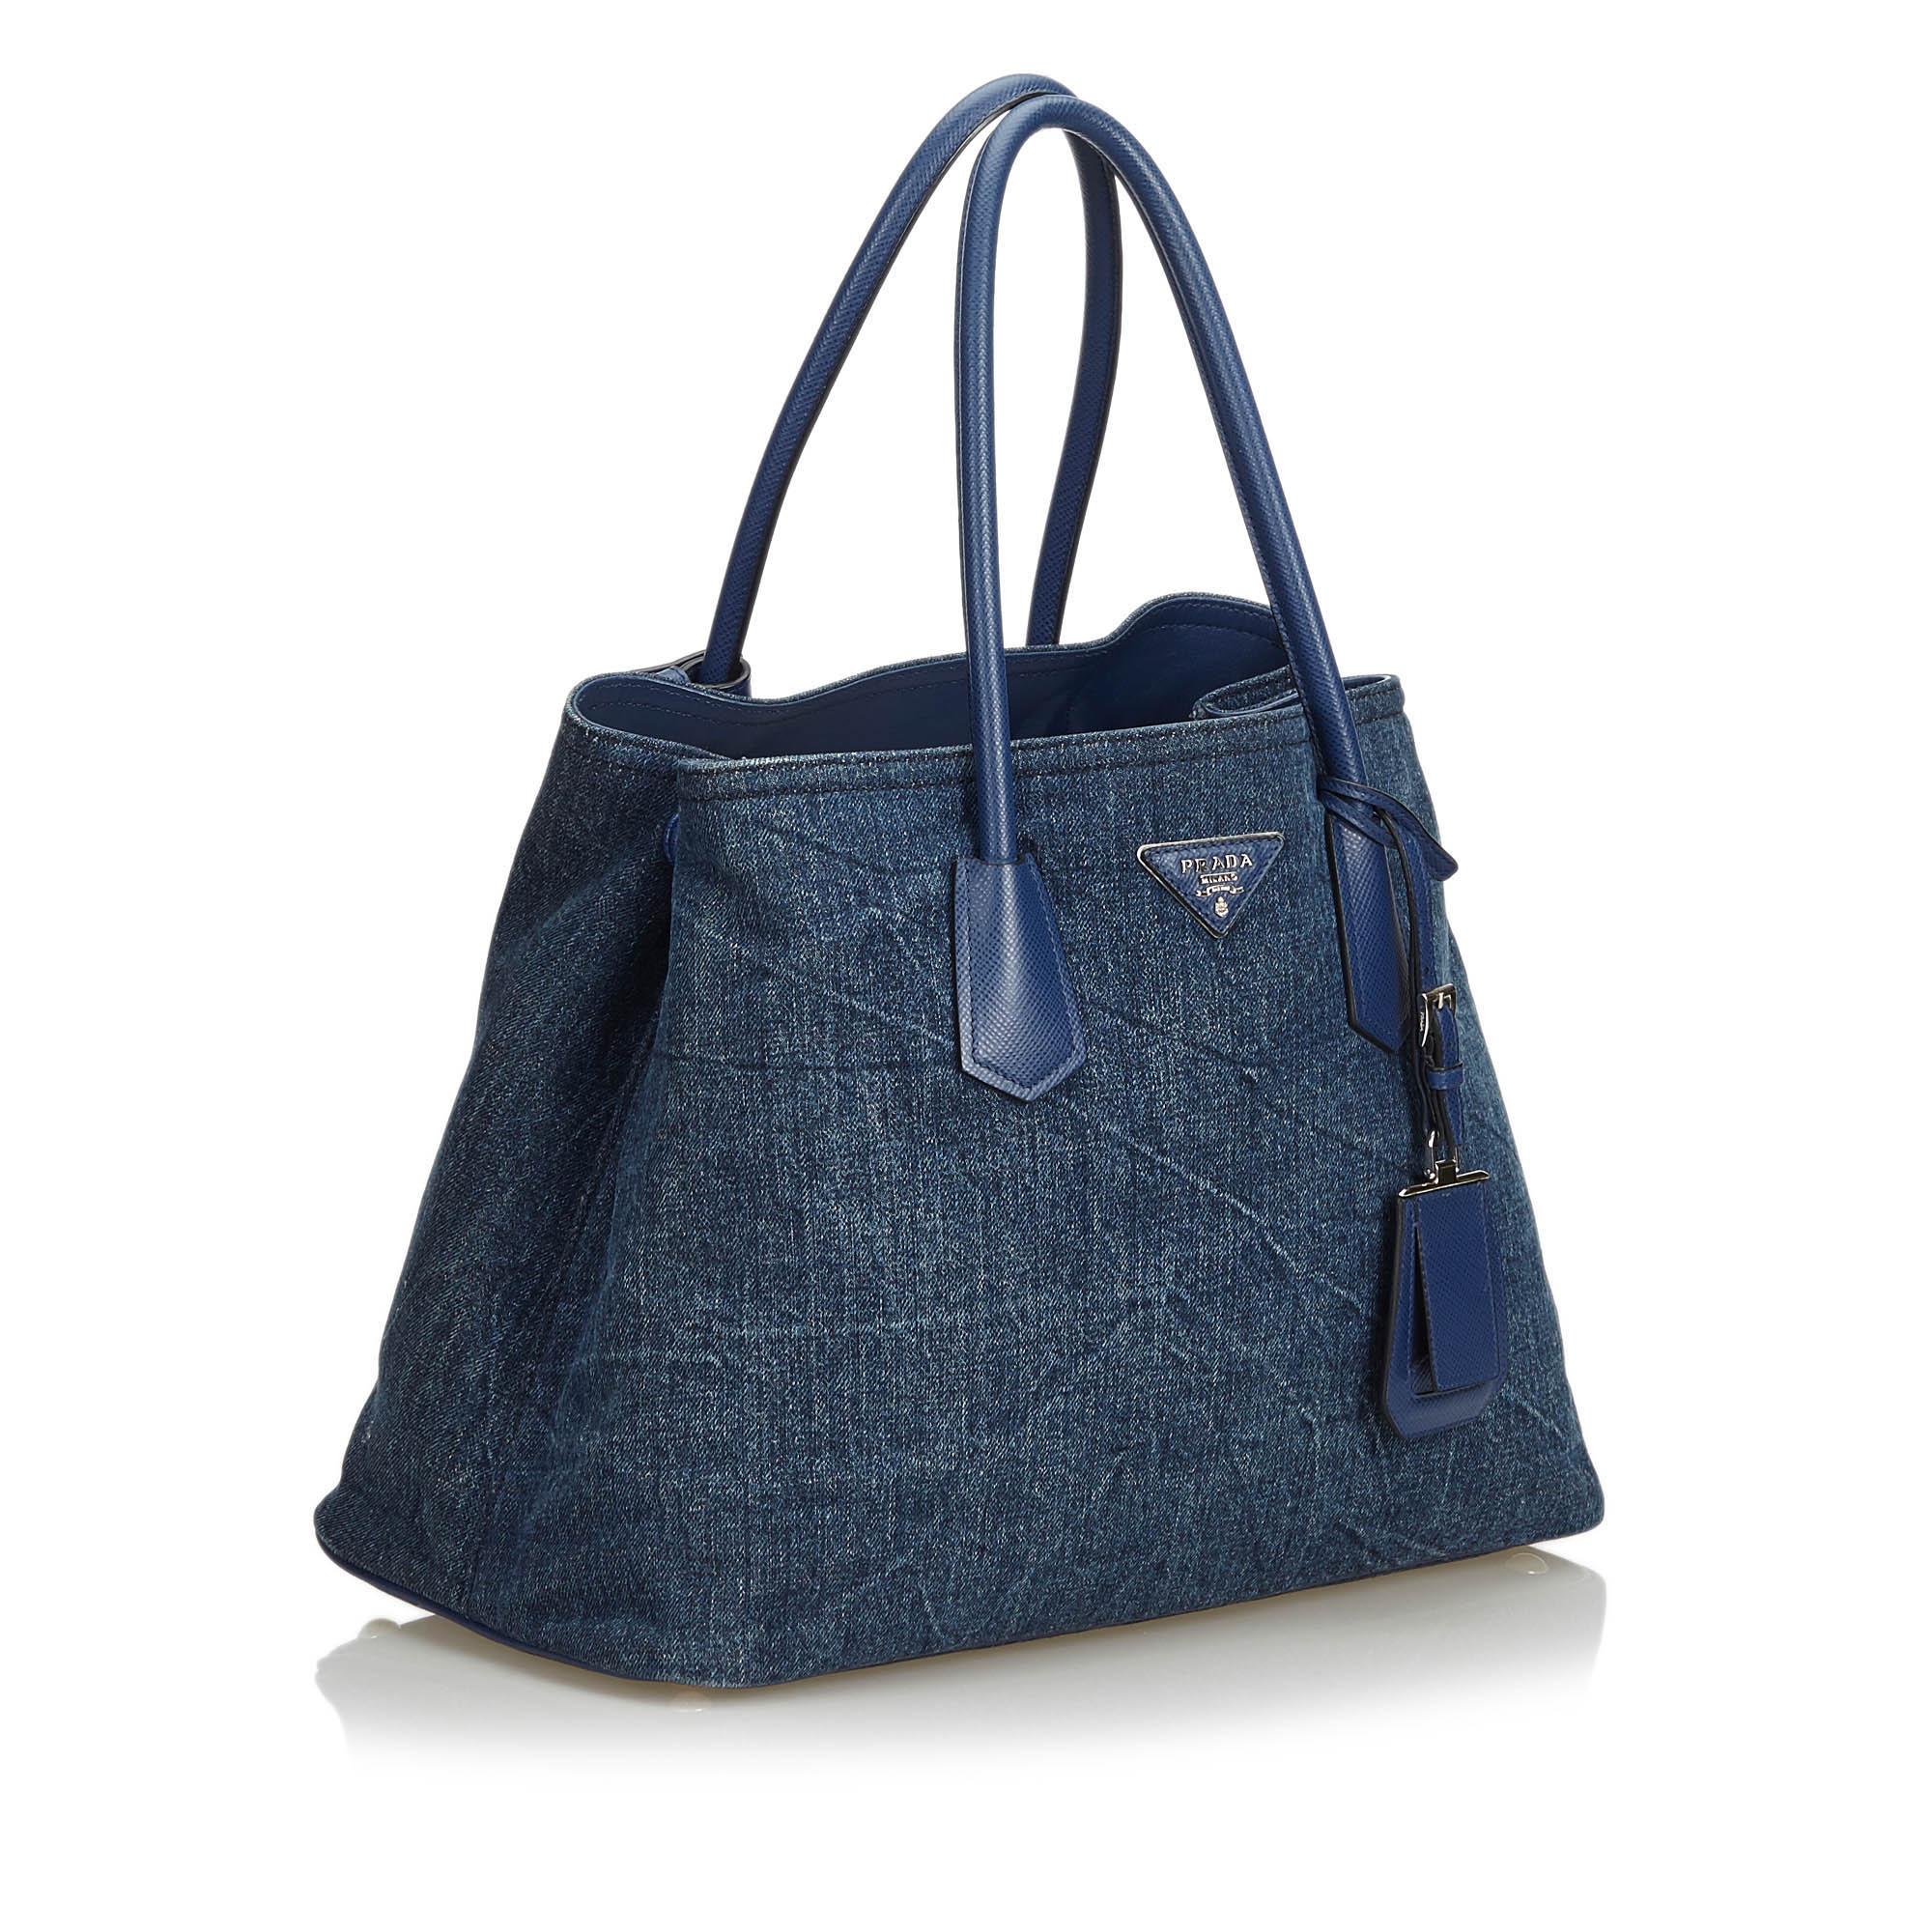 The Double Cuir tote bag features a denim body, rolled leather handles, an open top, and interior zip and flap pockets. It carries as B+ condition rating.

Inclusions: 
This item does not come with inclusions.

Dimensions:
Length: 27.00 cm
Width: